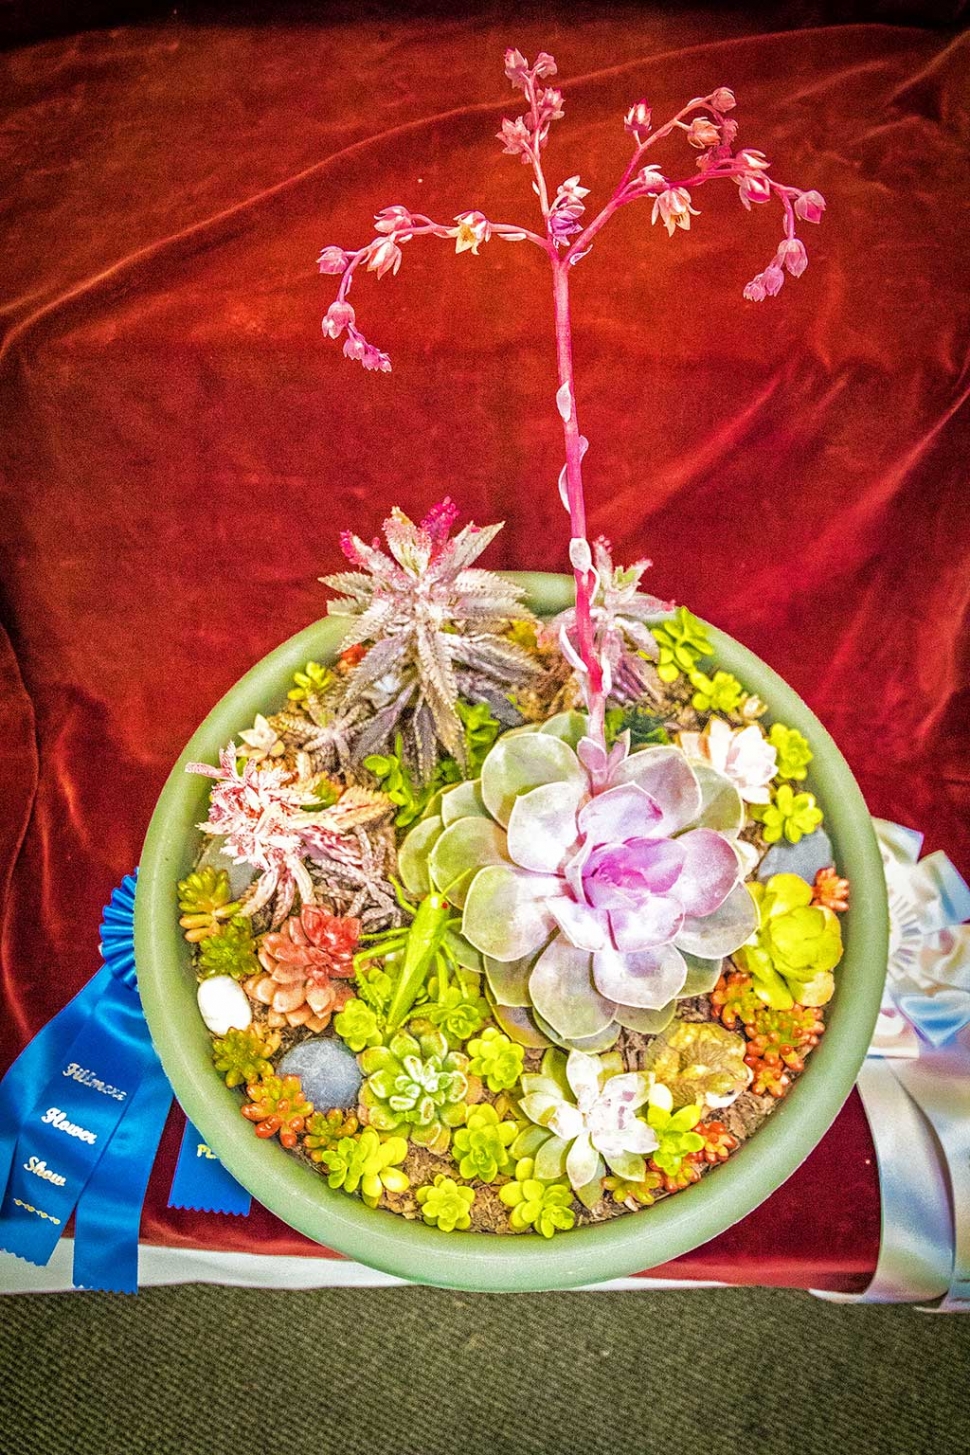 “Dish Garden with Succulents” by Cameron Zermeno